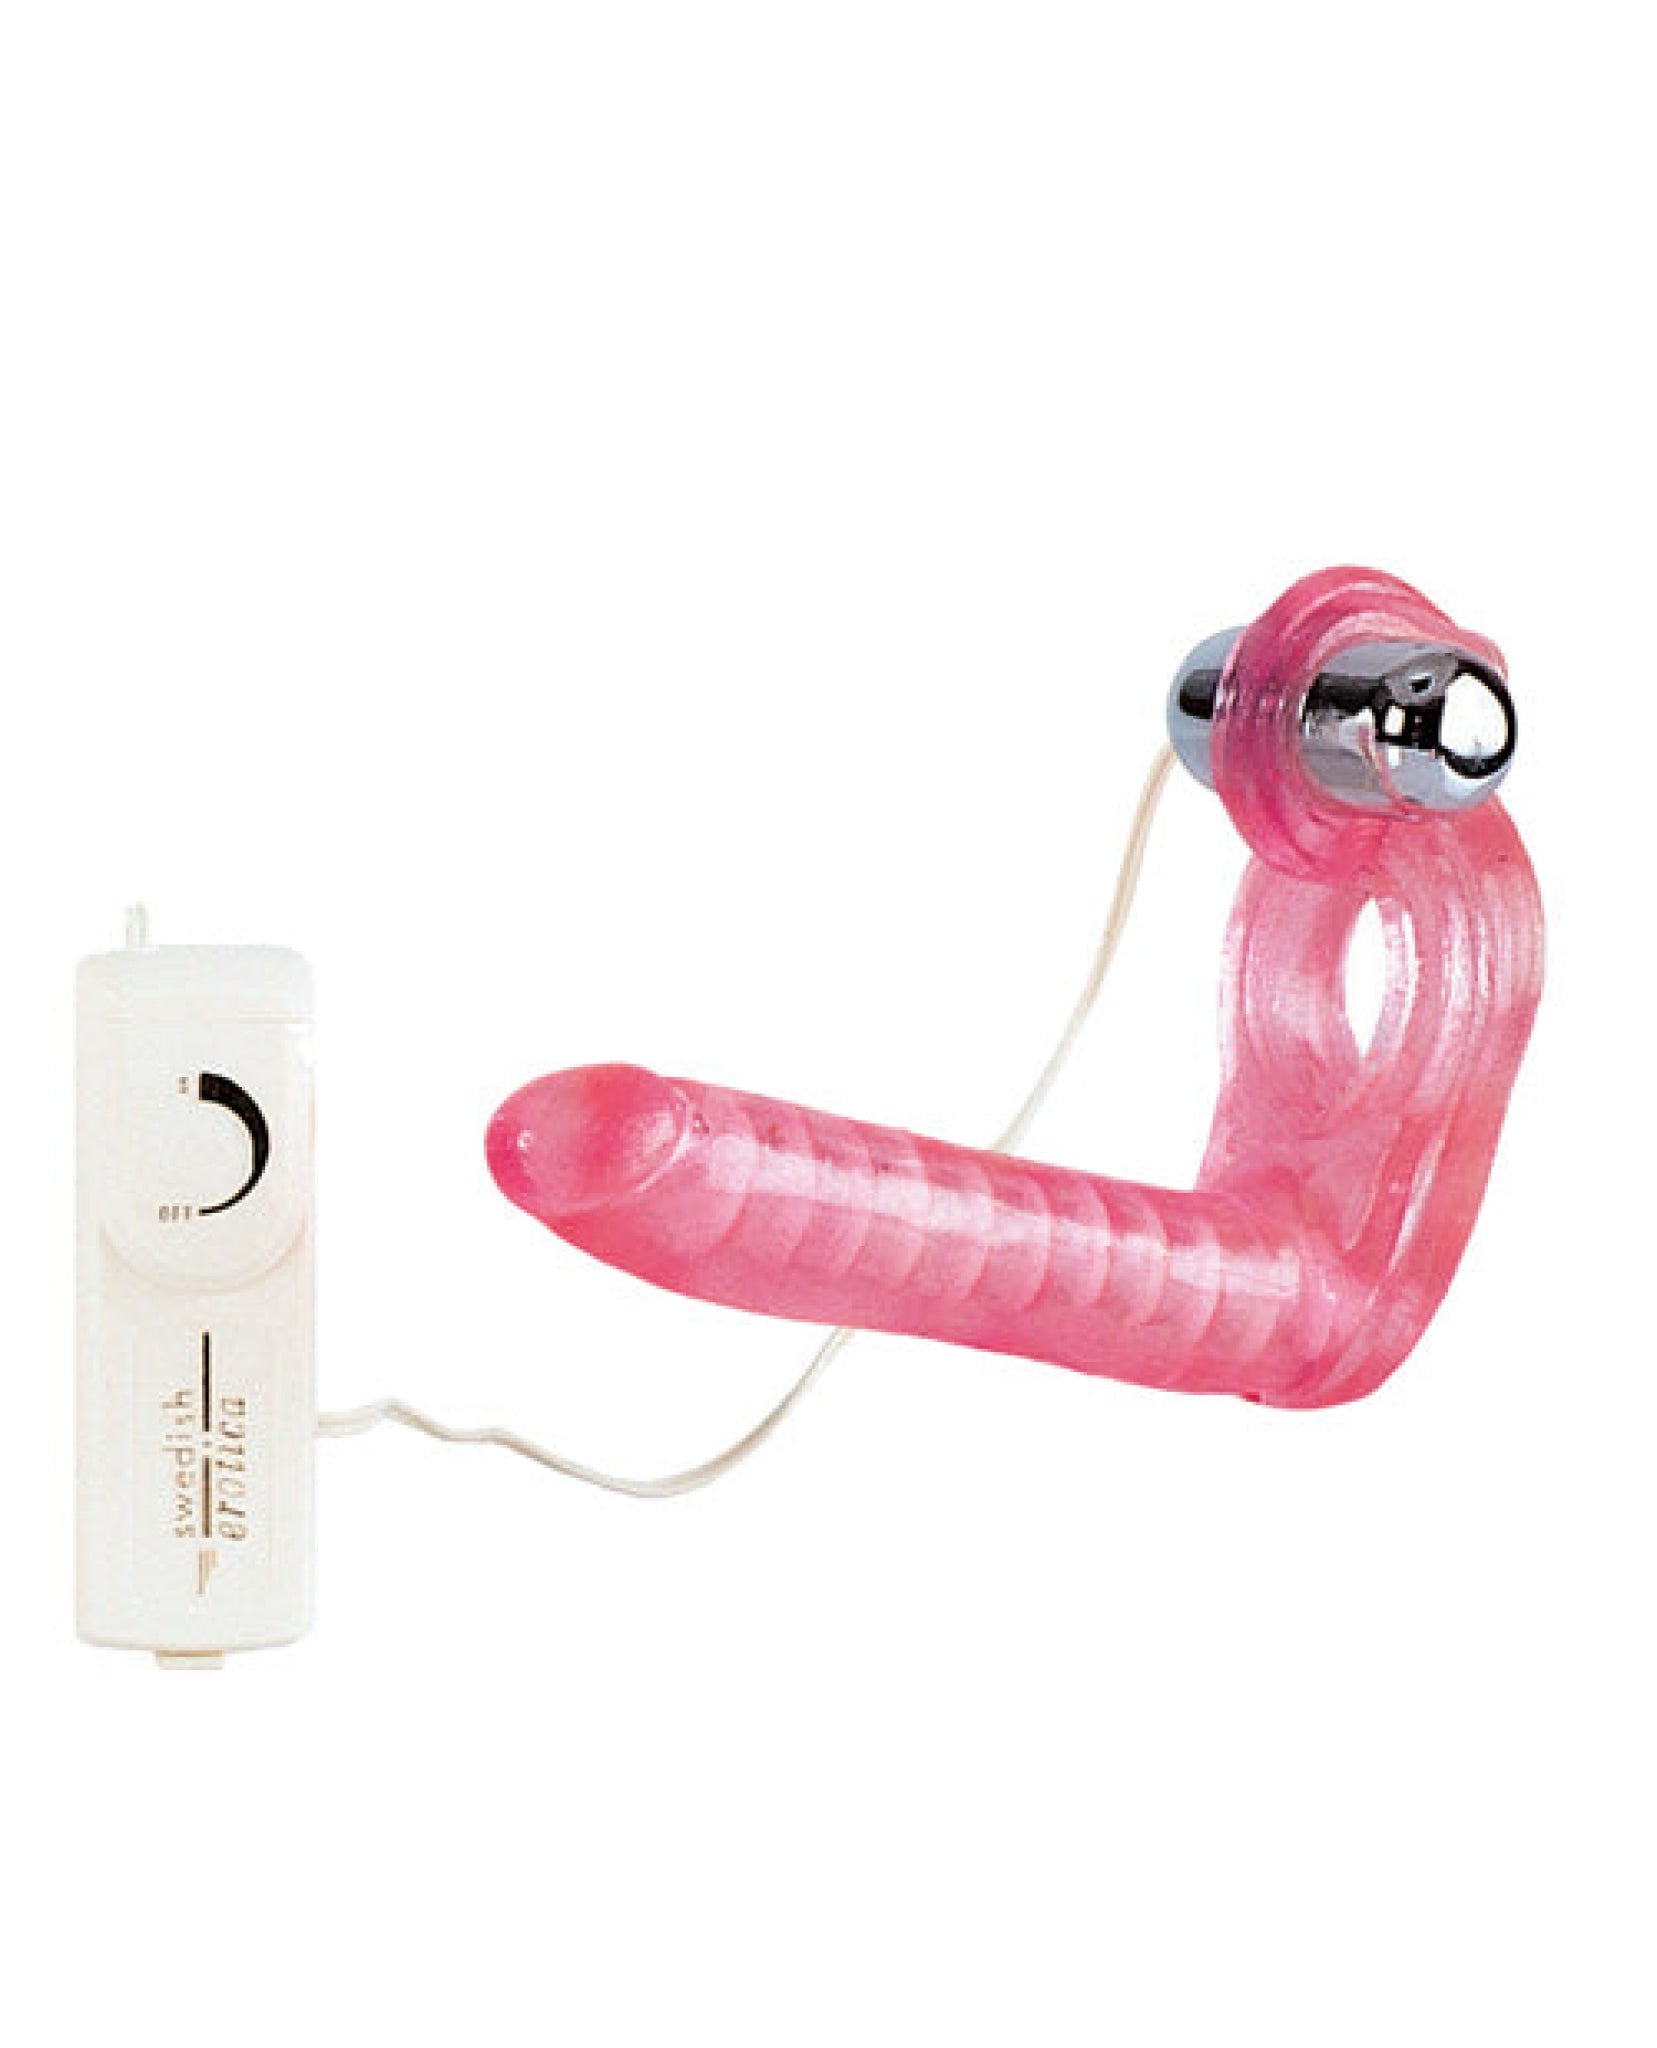 The Ultimate Triple Stimulator Flexible Dong W-cock Ring - Pink California Exotic Novelties